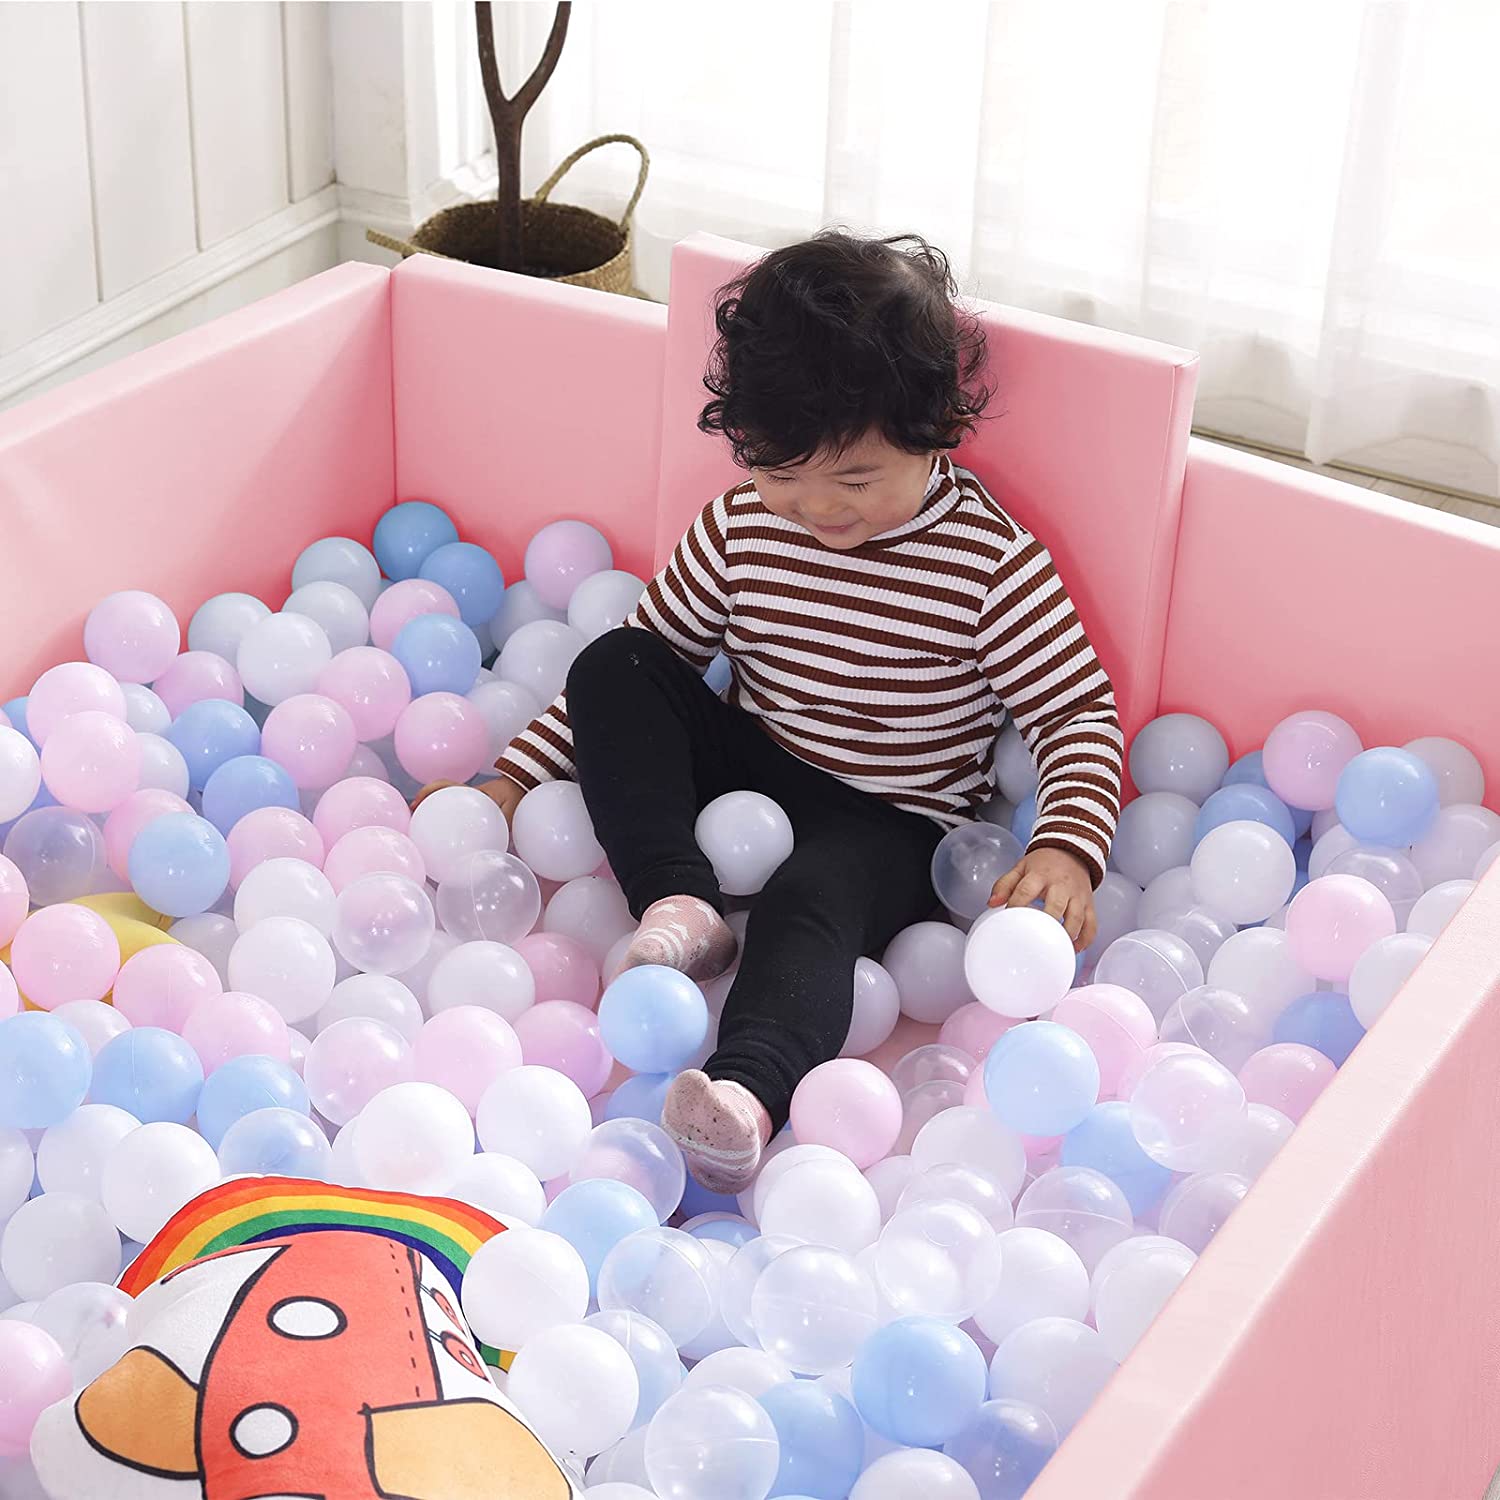 Soft Foam Foldable Pink Ball Pit Crawling Fence Children's Playground